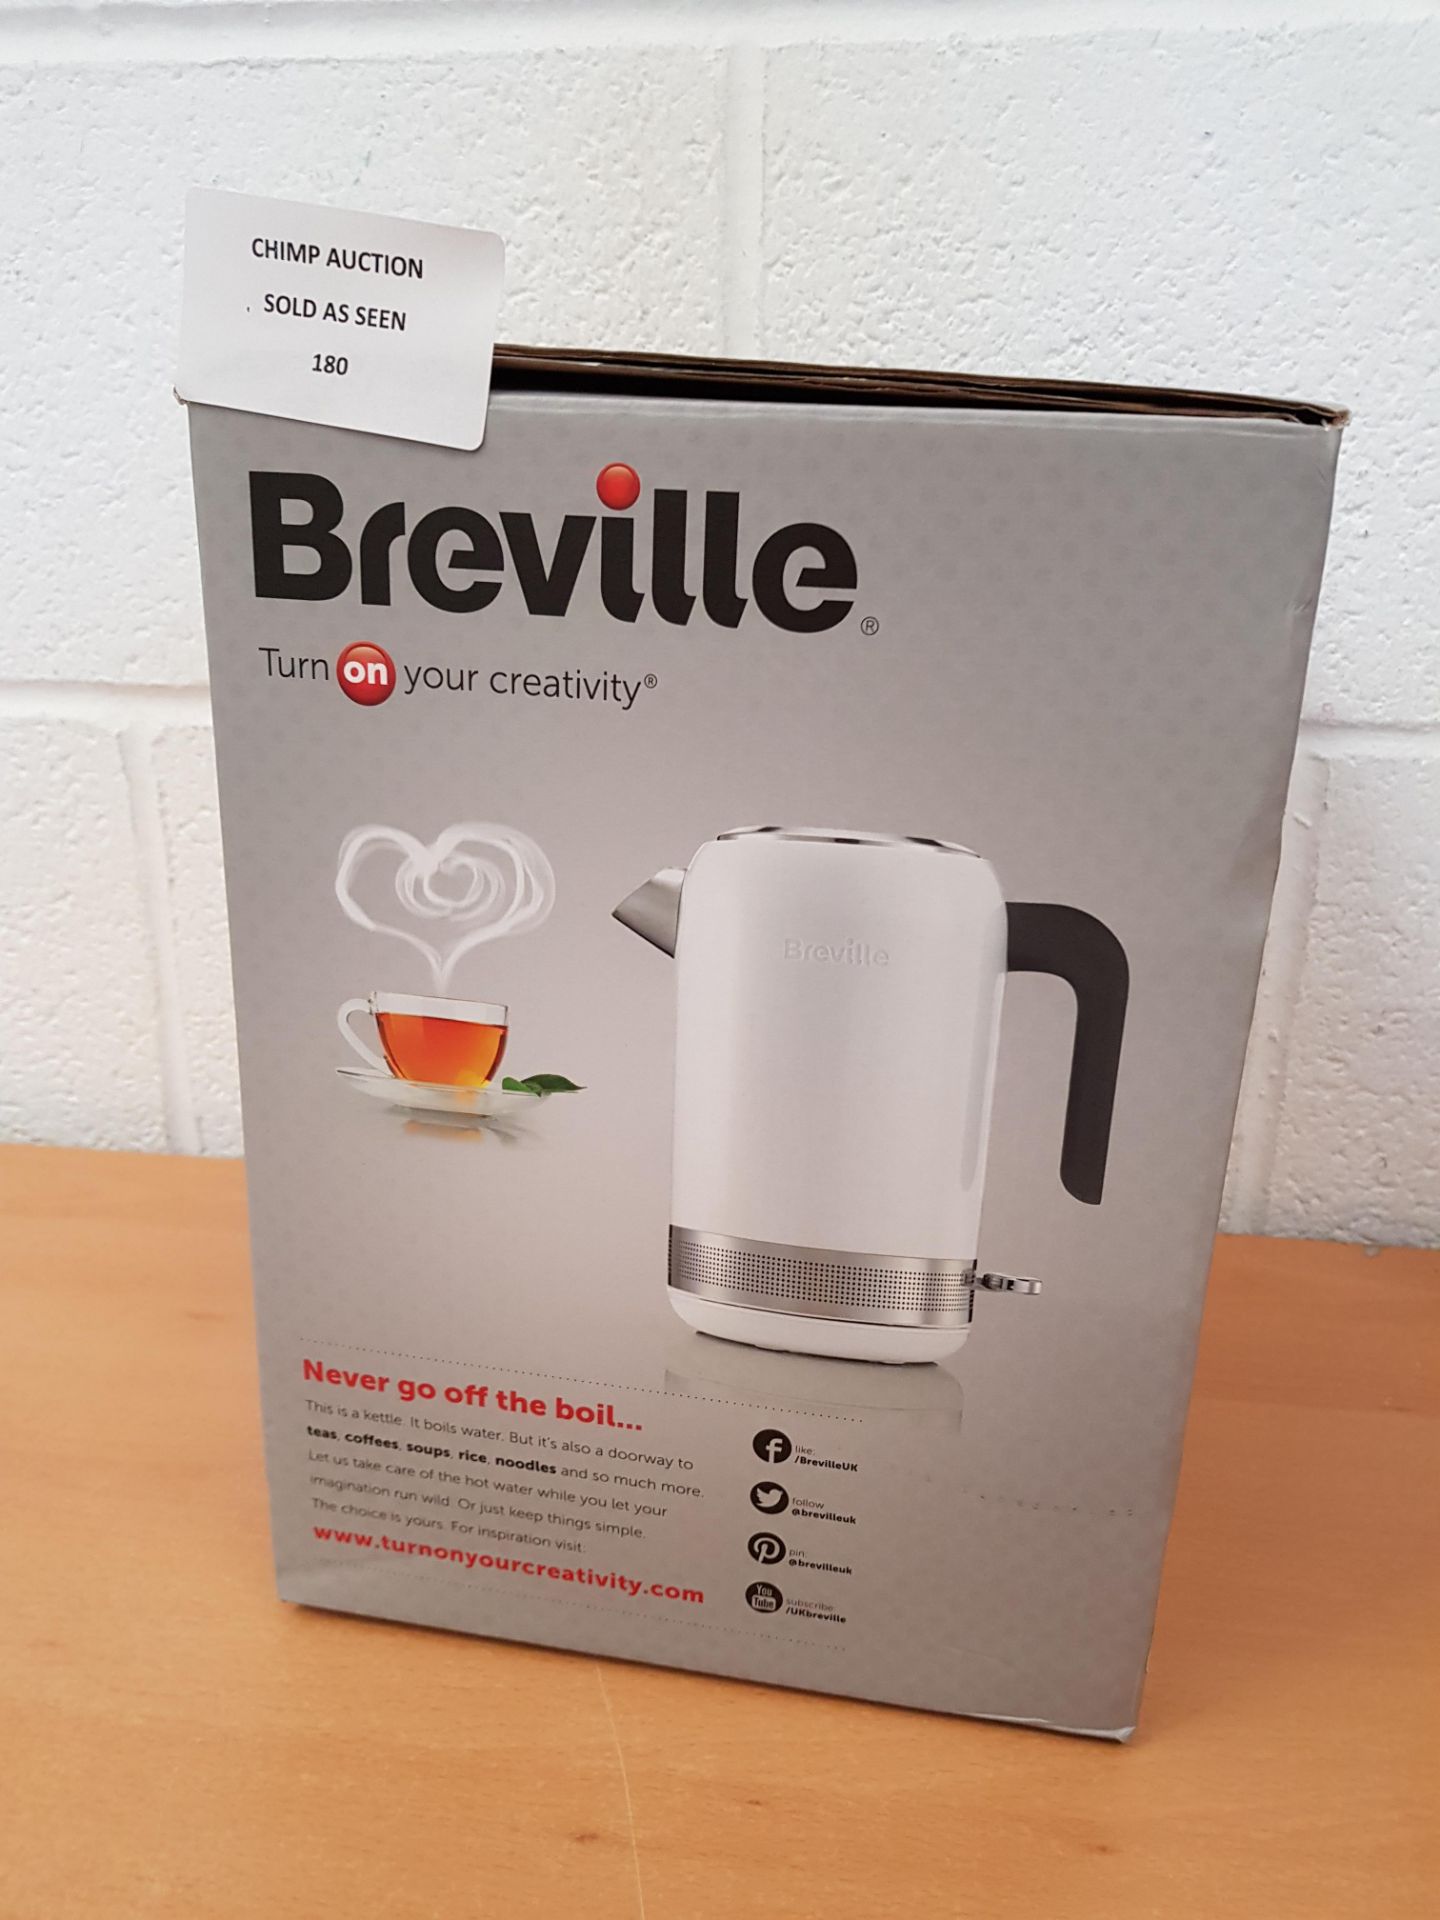 Breville High Gloss Collection jug kettle